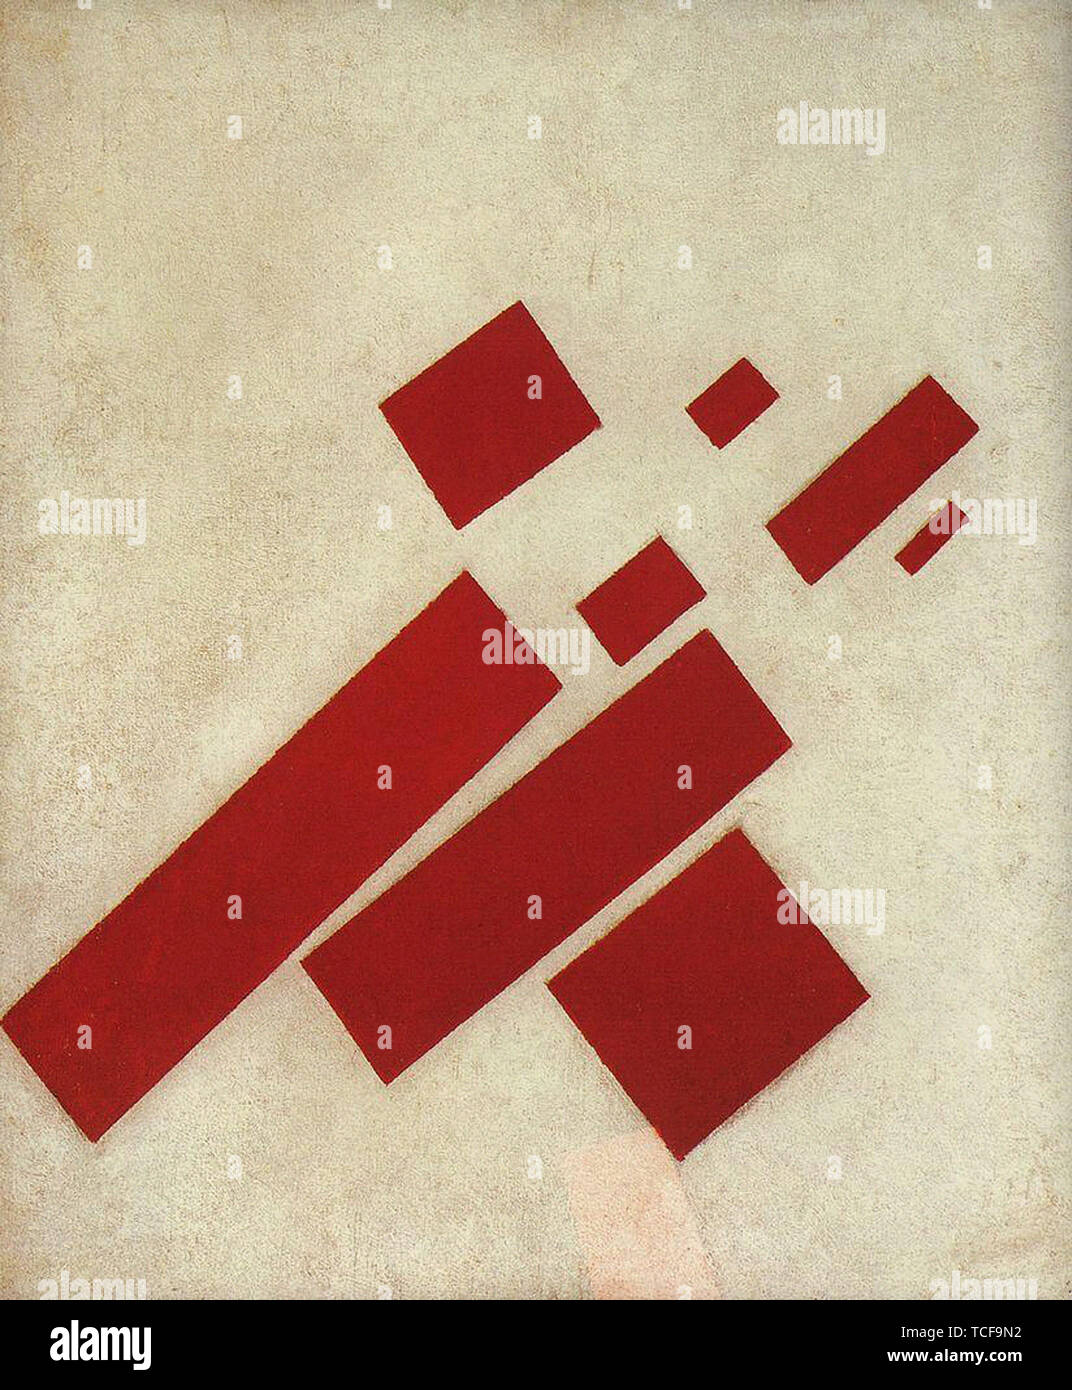 Kasimir Malevitch - Suprematism With Eight Rectangles 1915 Stock Photo